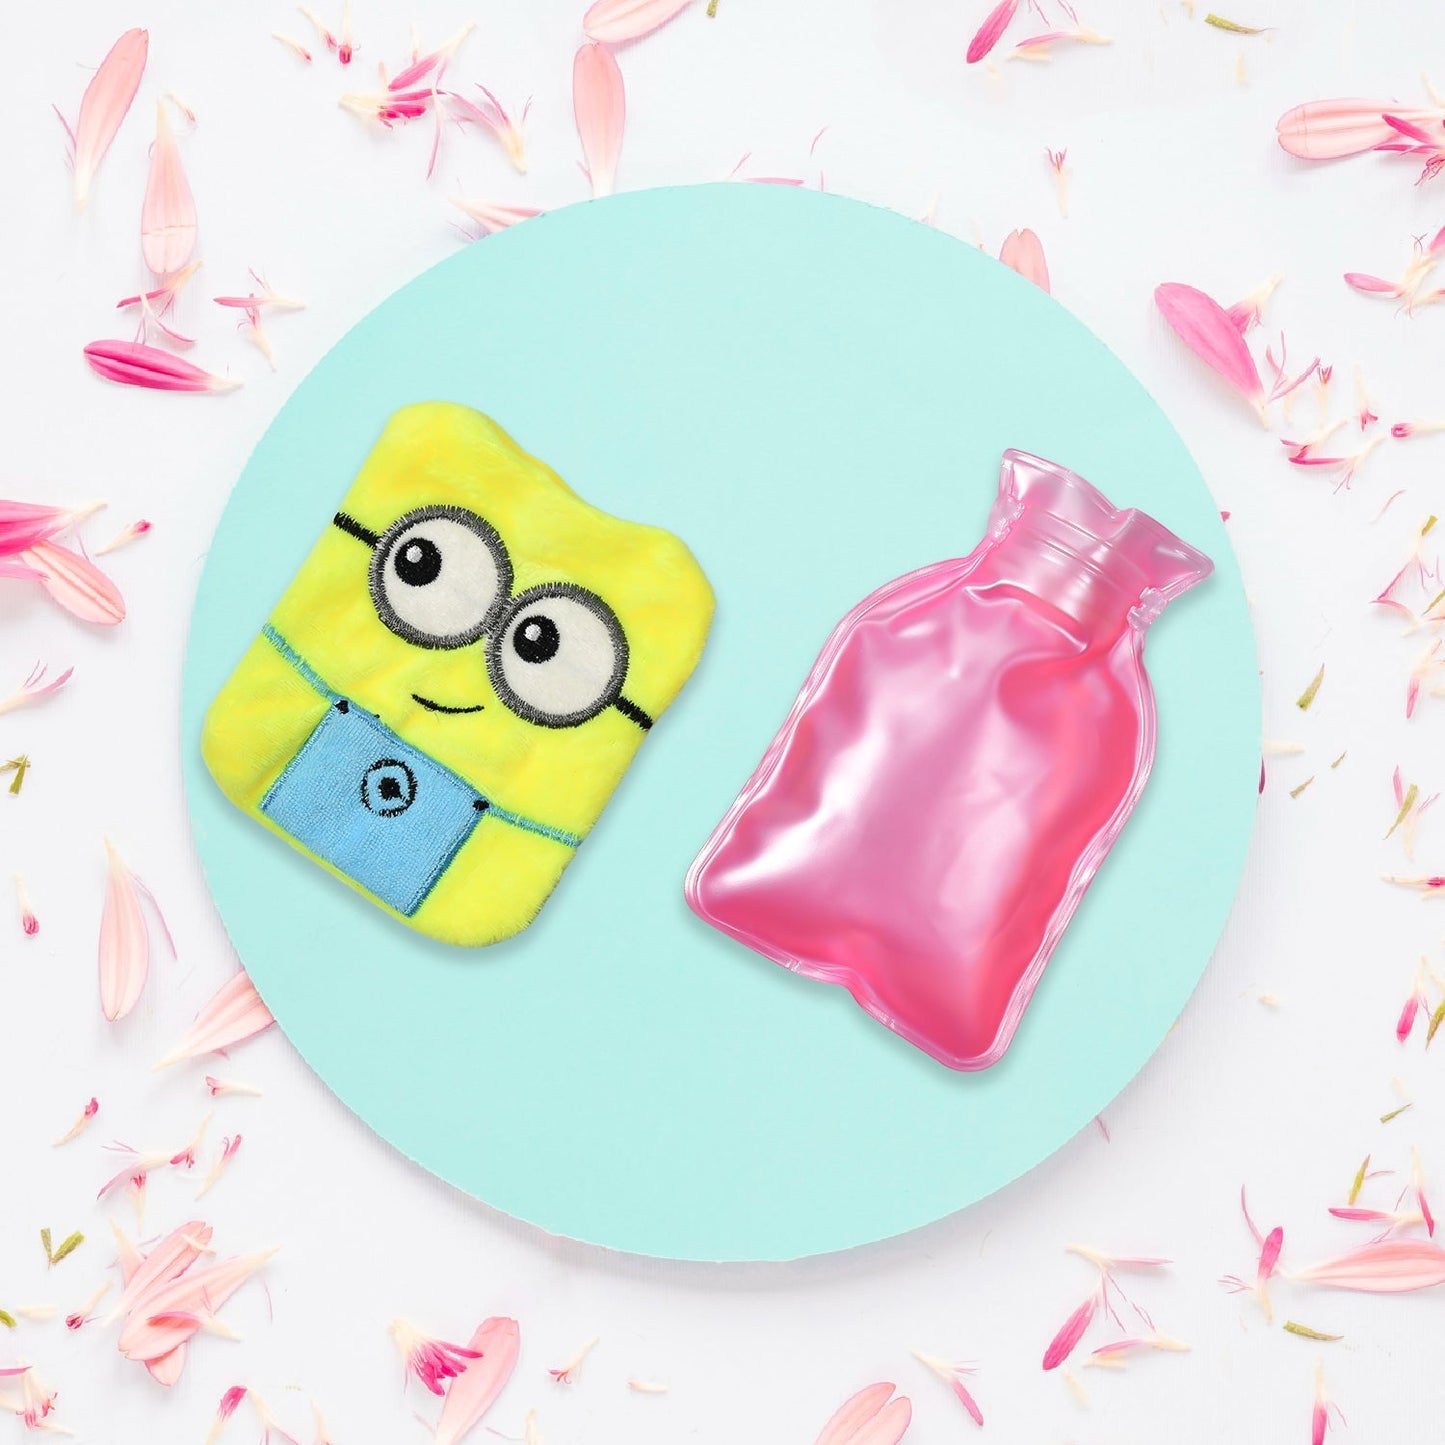 6507 2Eye Minions small Hot Water Bag with Cover for Pain Relief, Neck, Shoulder Pain and Hand, Feet Warmer, Menstrual Cramps. DeoDap